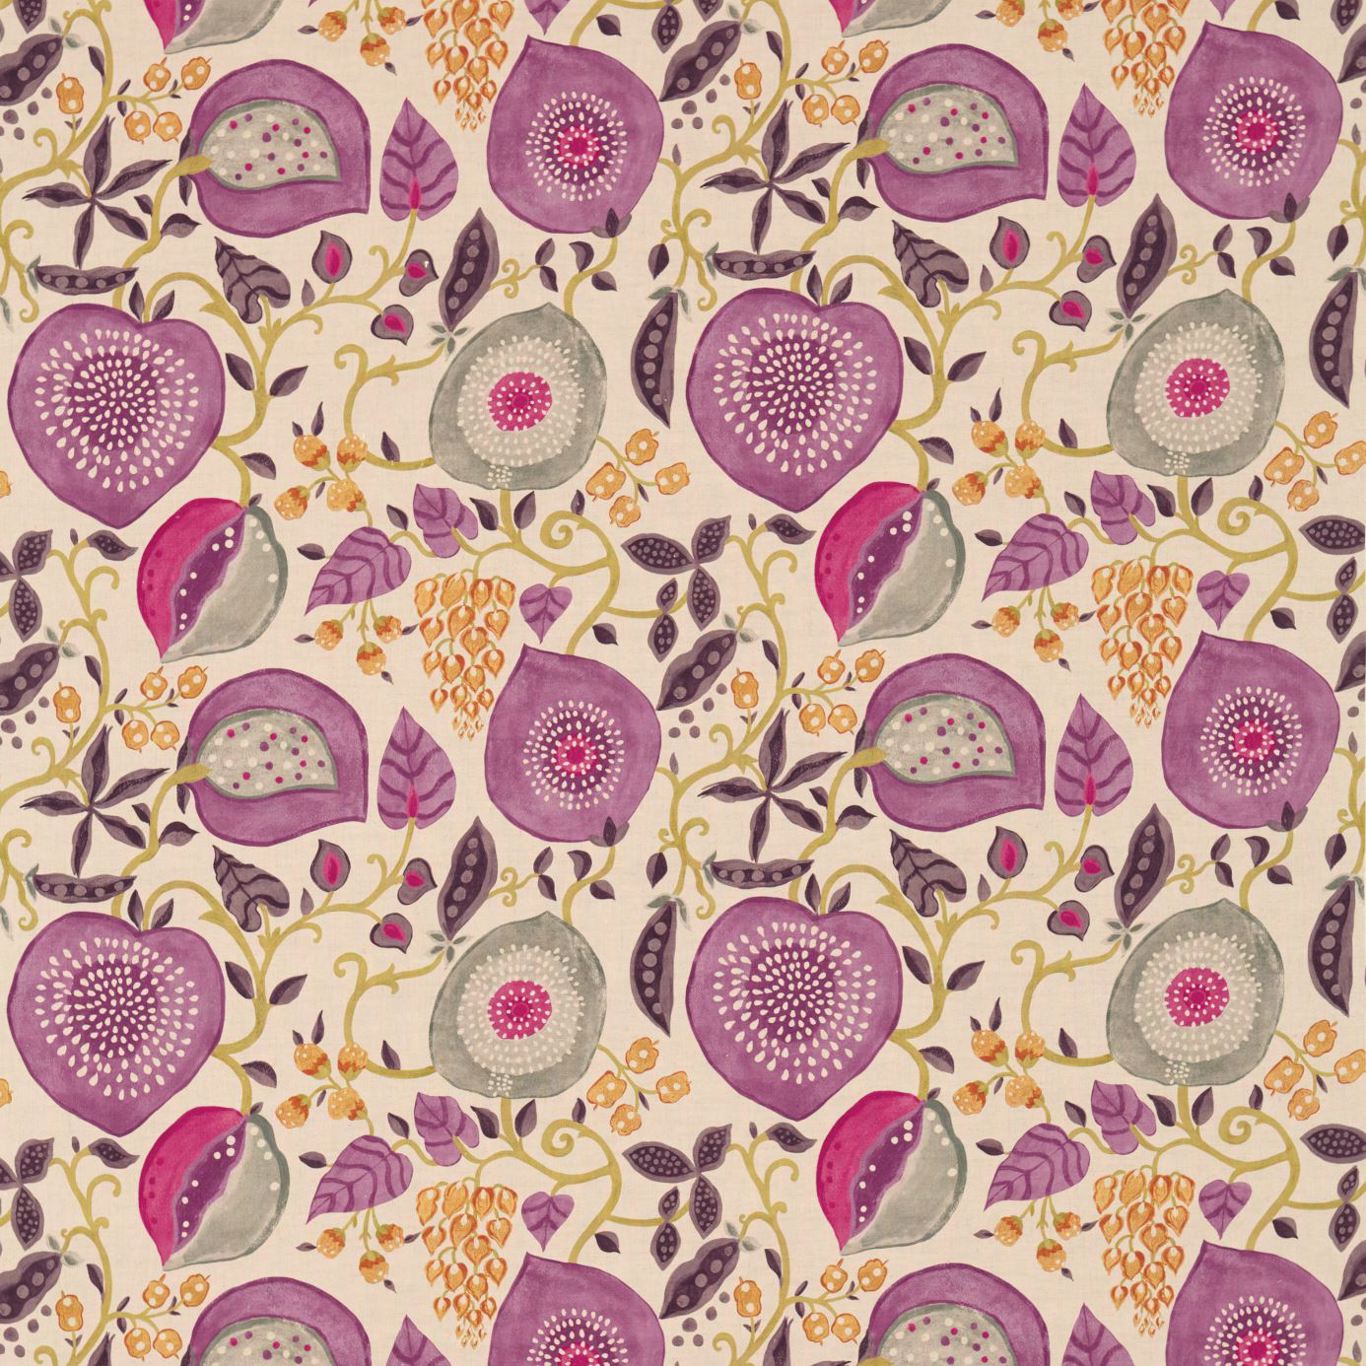 Peas & Pods Berry/Linen Fabric by SAN